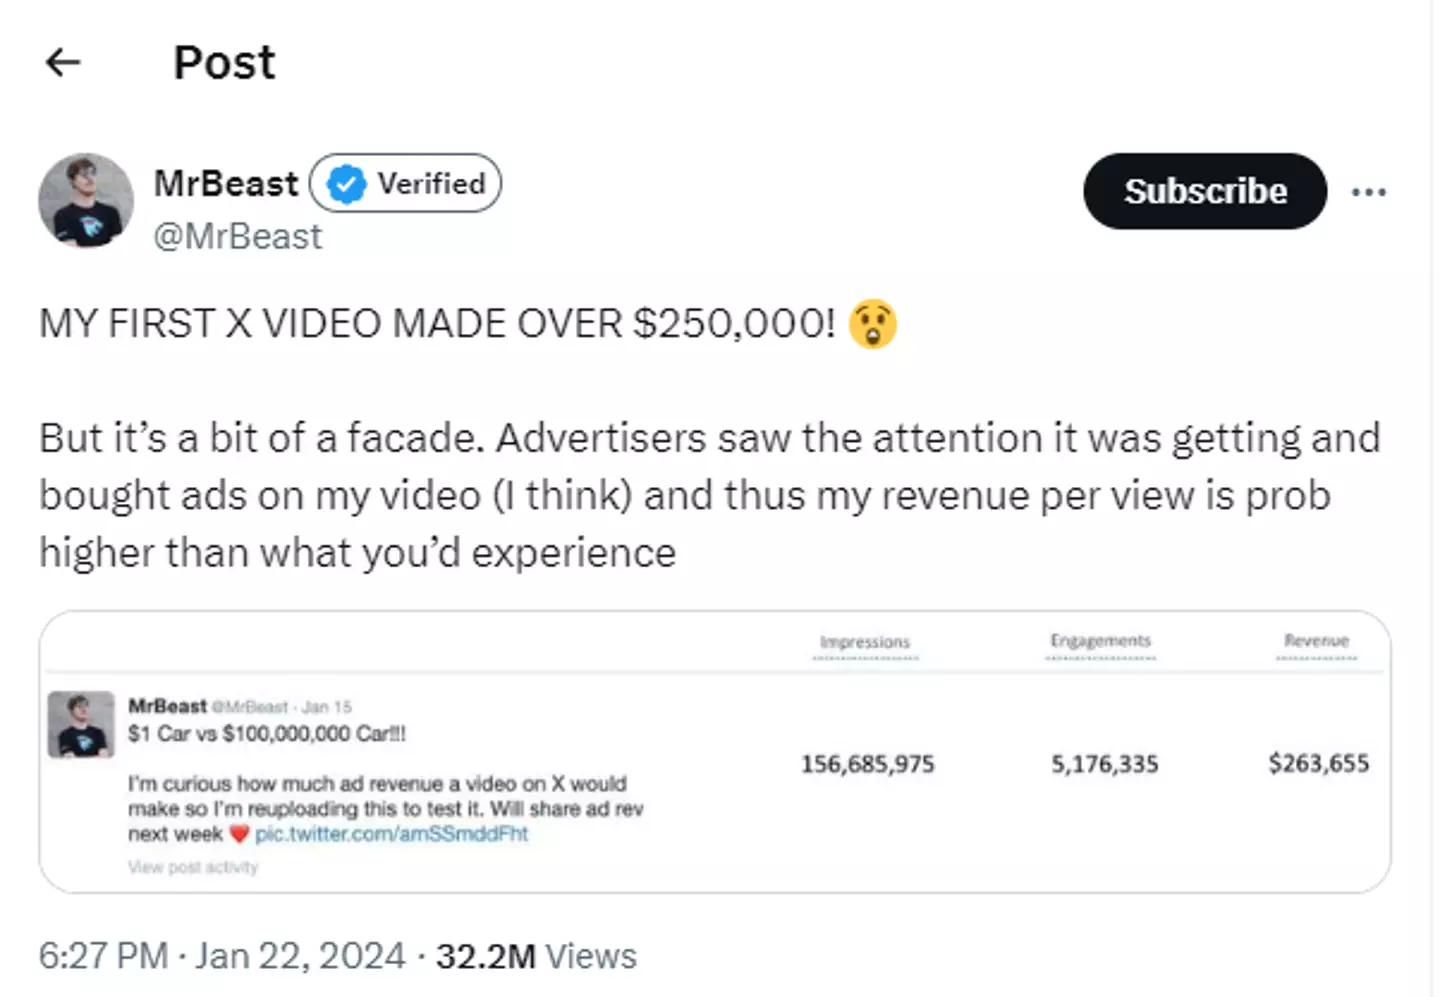 A previous X post shared by MrBeast.